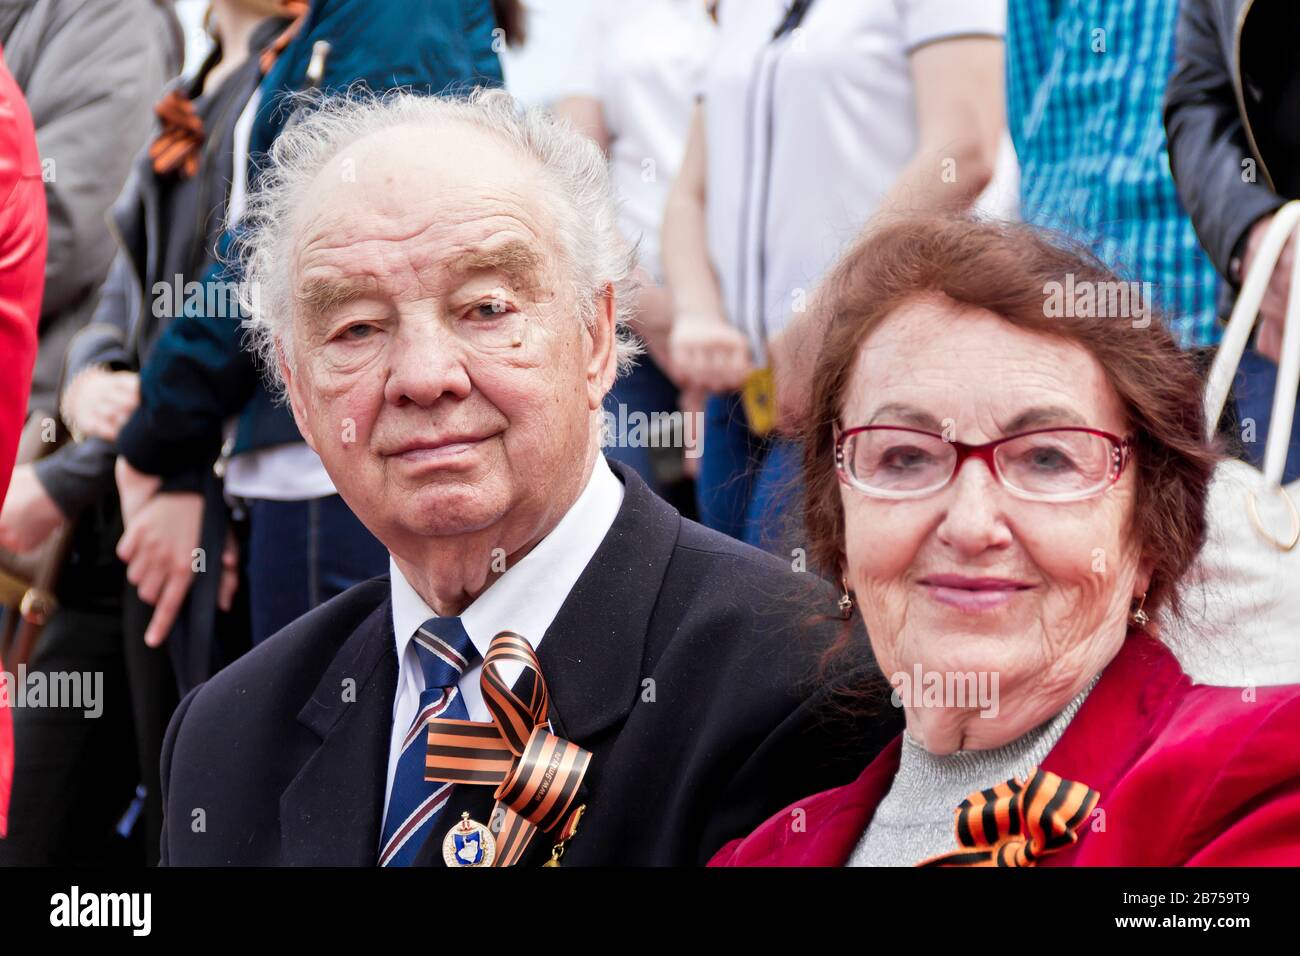 SAMARA, RUSSIA - MAY 9, 2017: Russian veteran with wife on celebration at the parade annual Victory Day, May, 9, 2017 in Samara, Russia Stock Photo